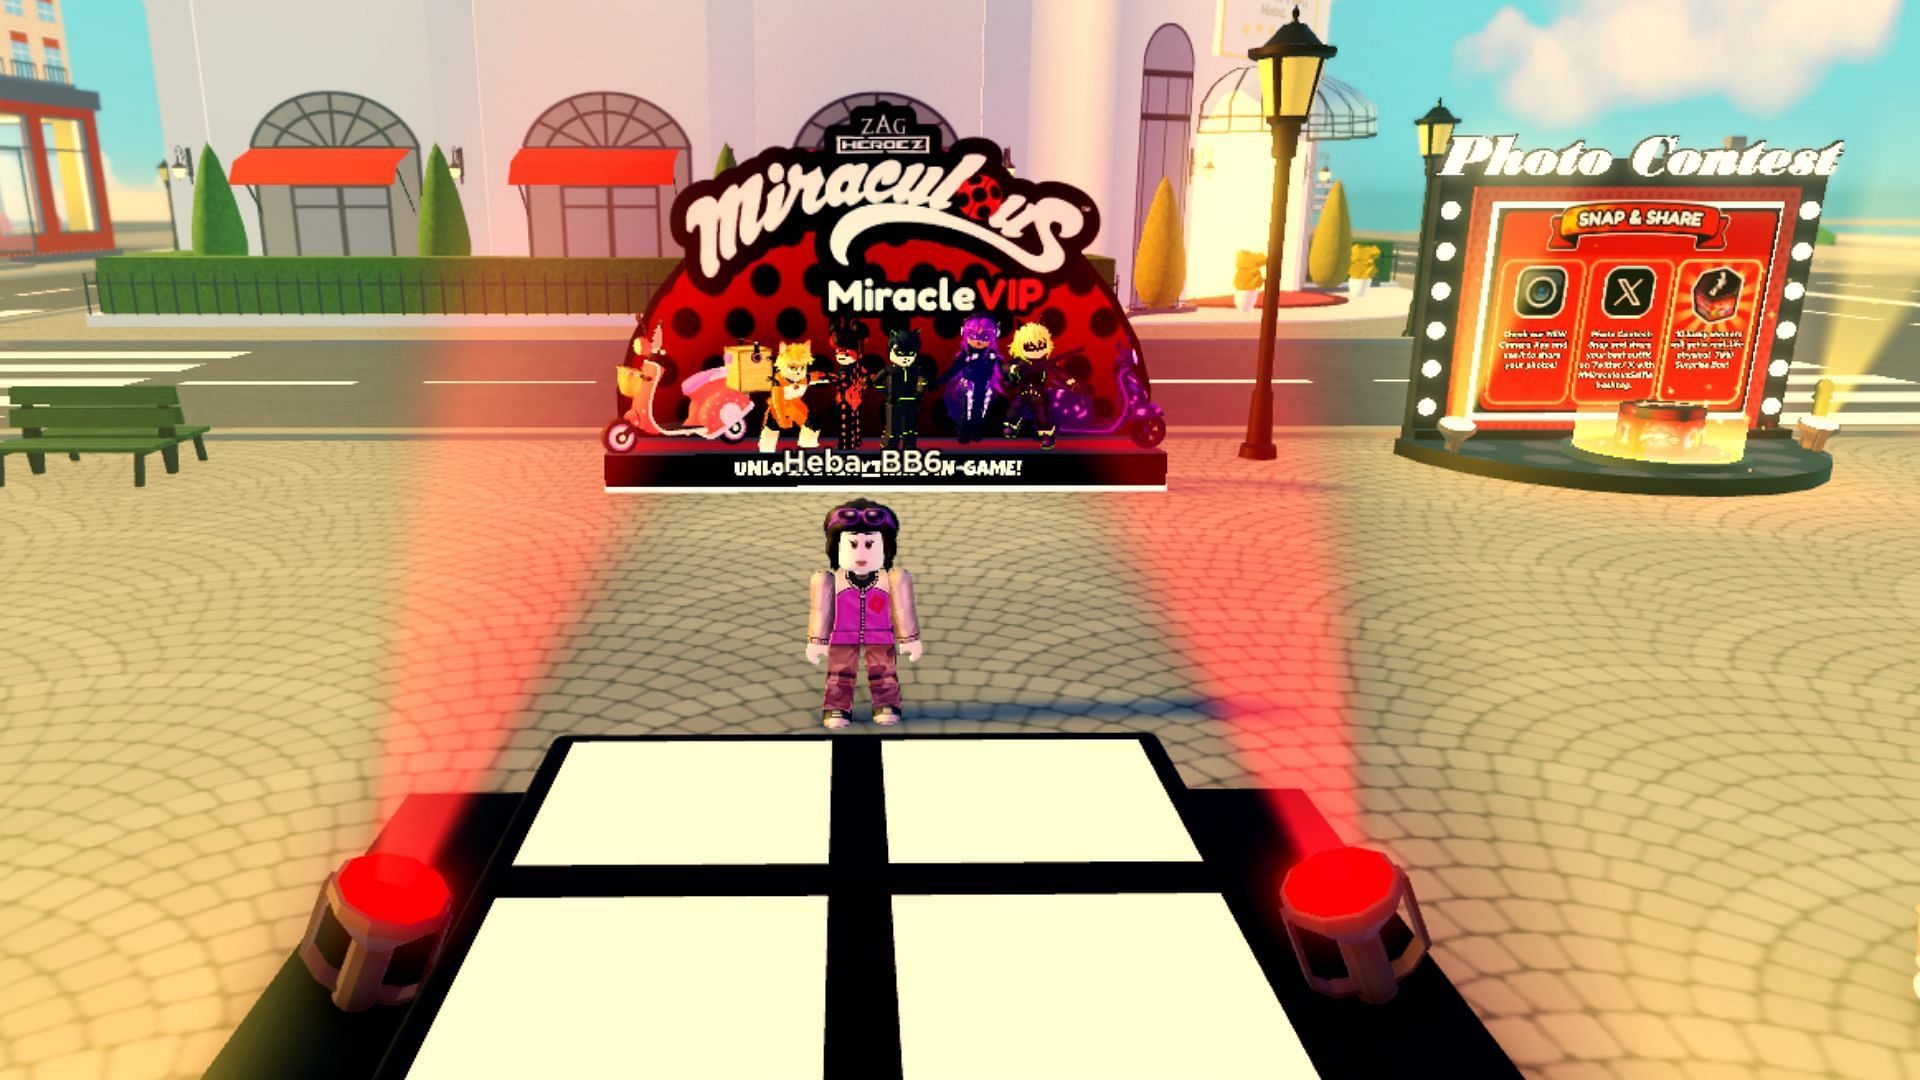 Miracle VIP in Miraculous RP (Image via Roblox)